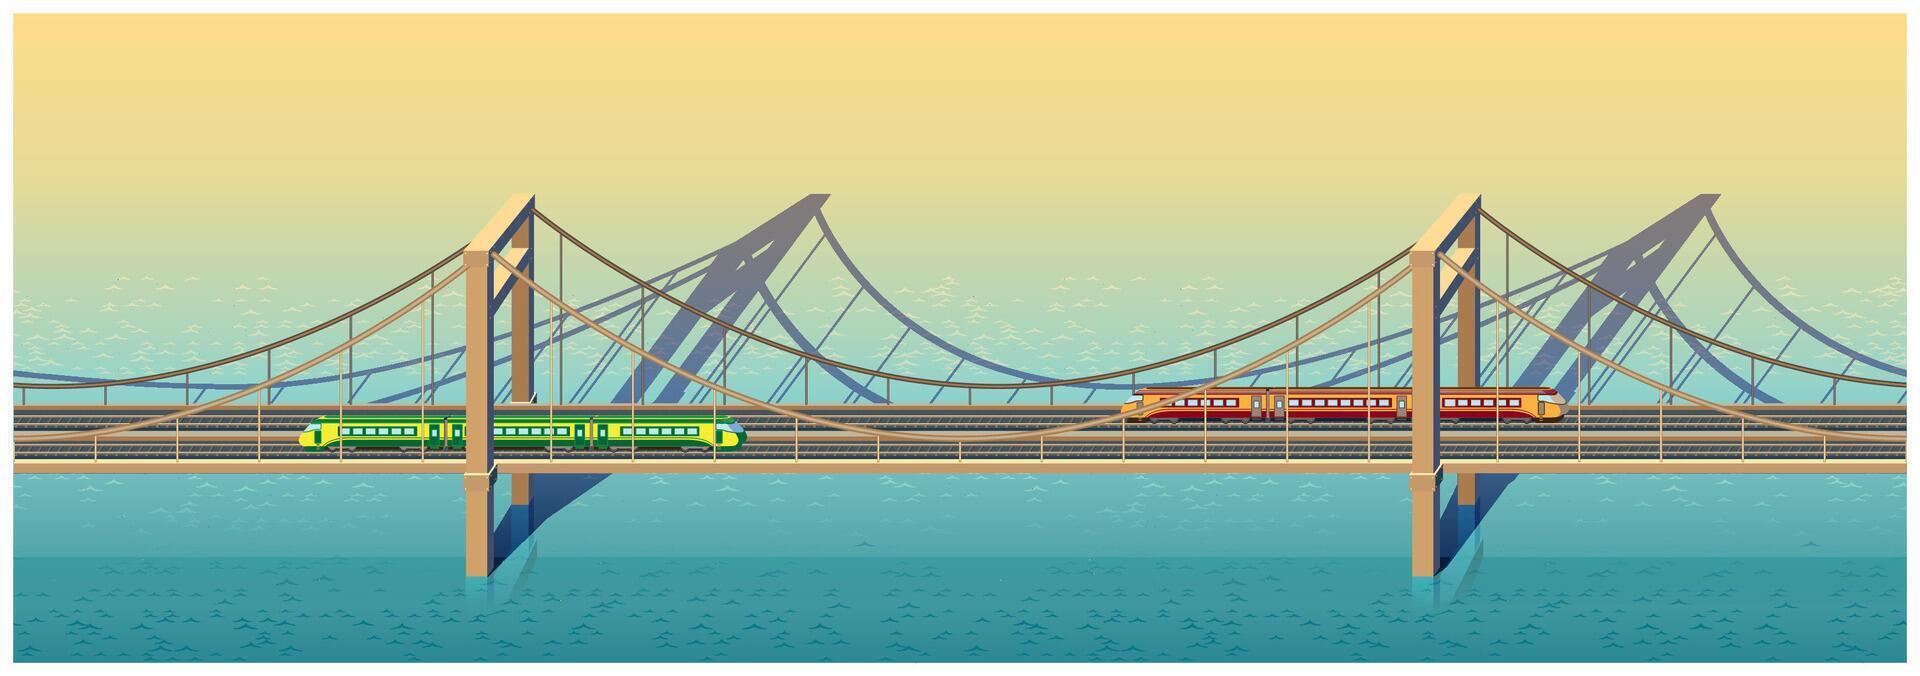 Seamless horizontal composition illustrated large railway bridge with two trains on it on a sunny day vector